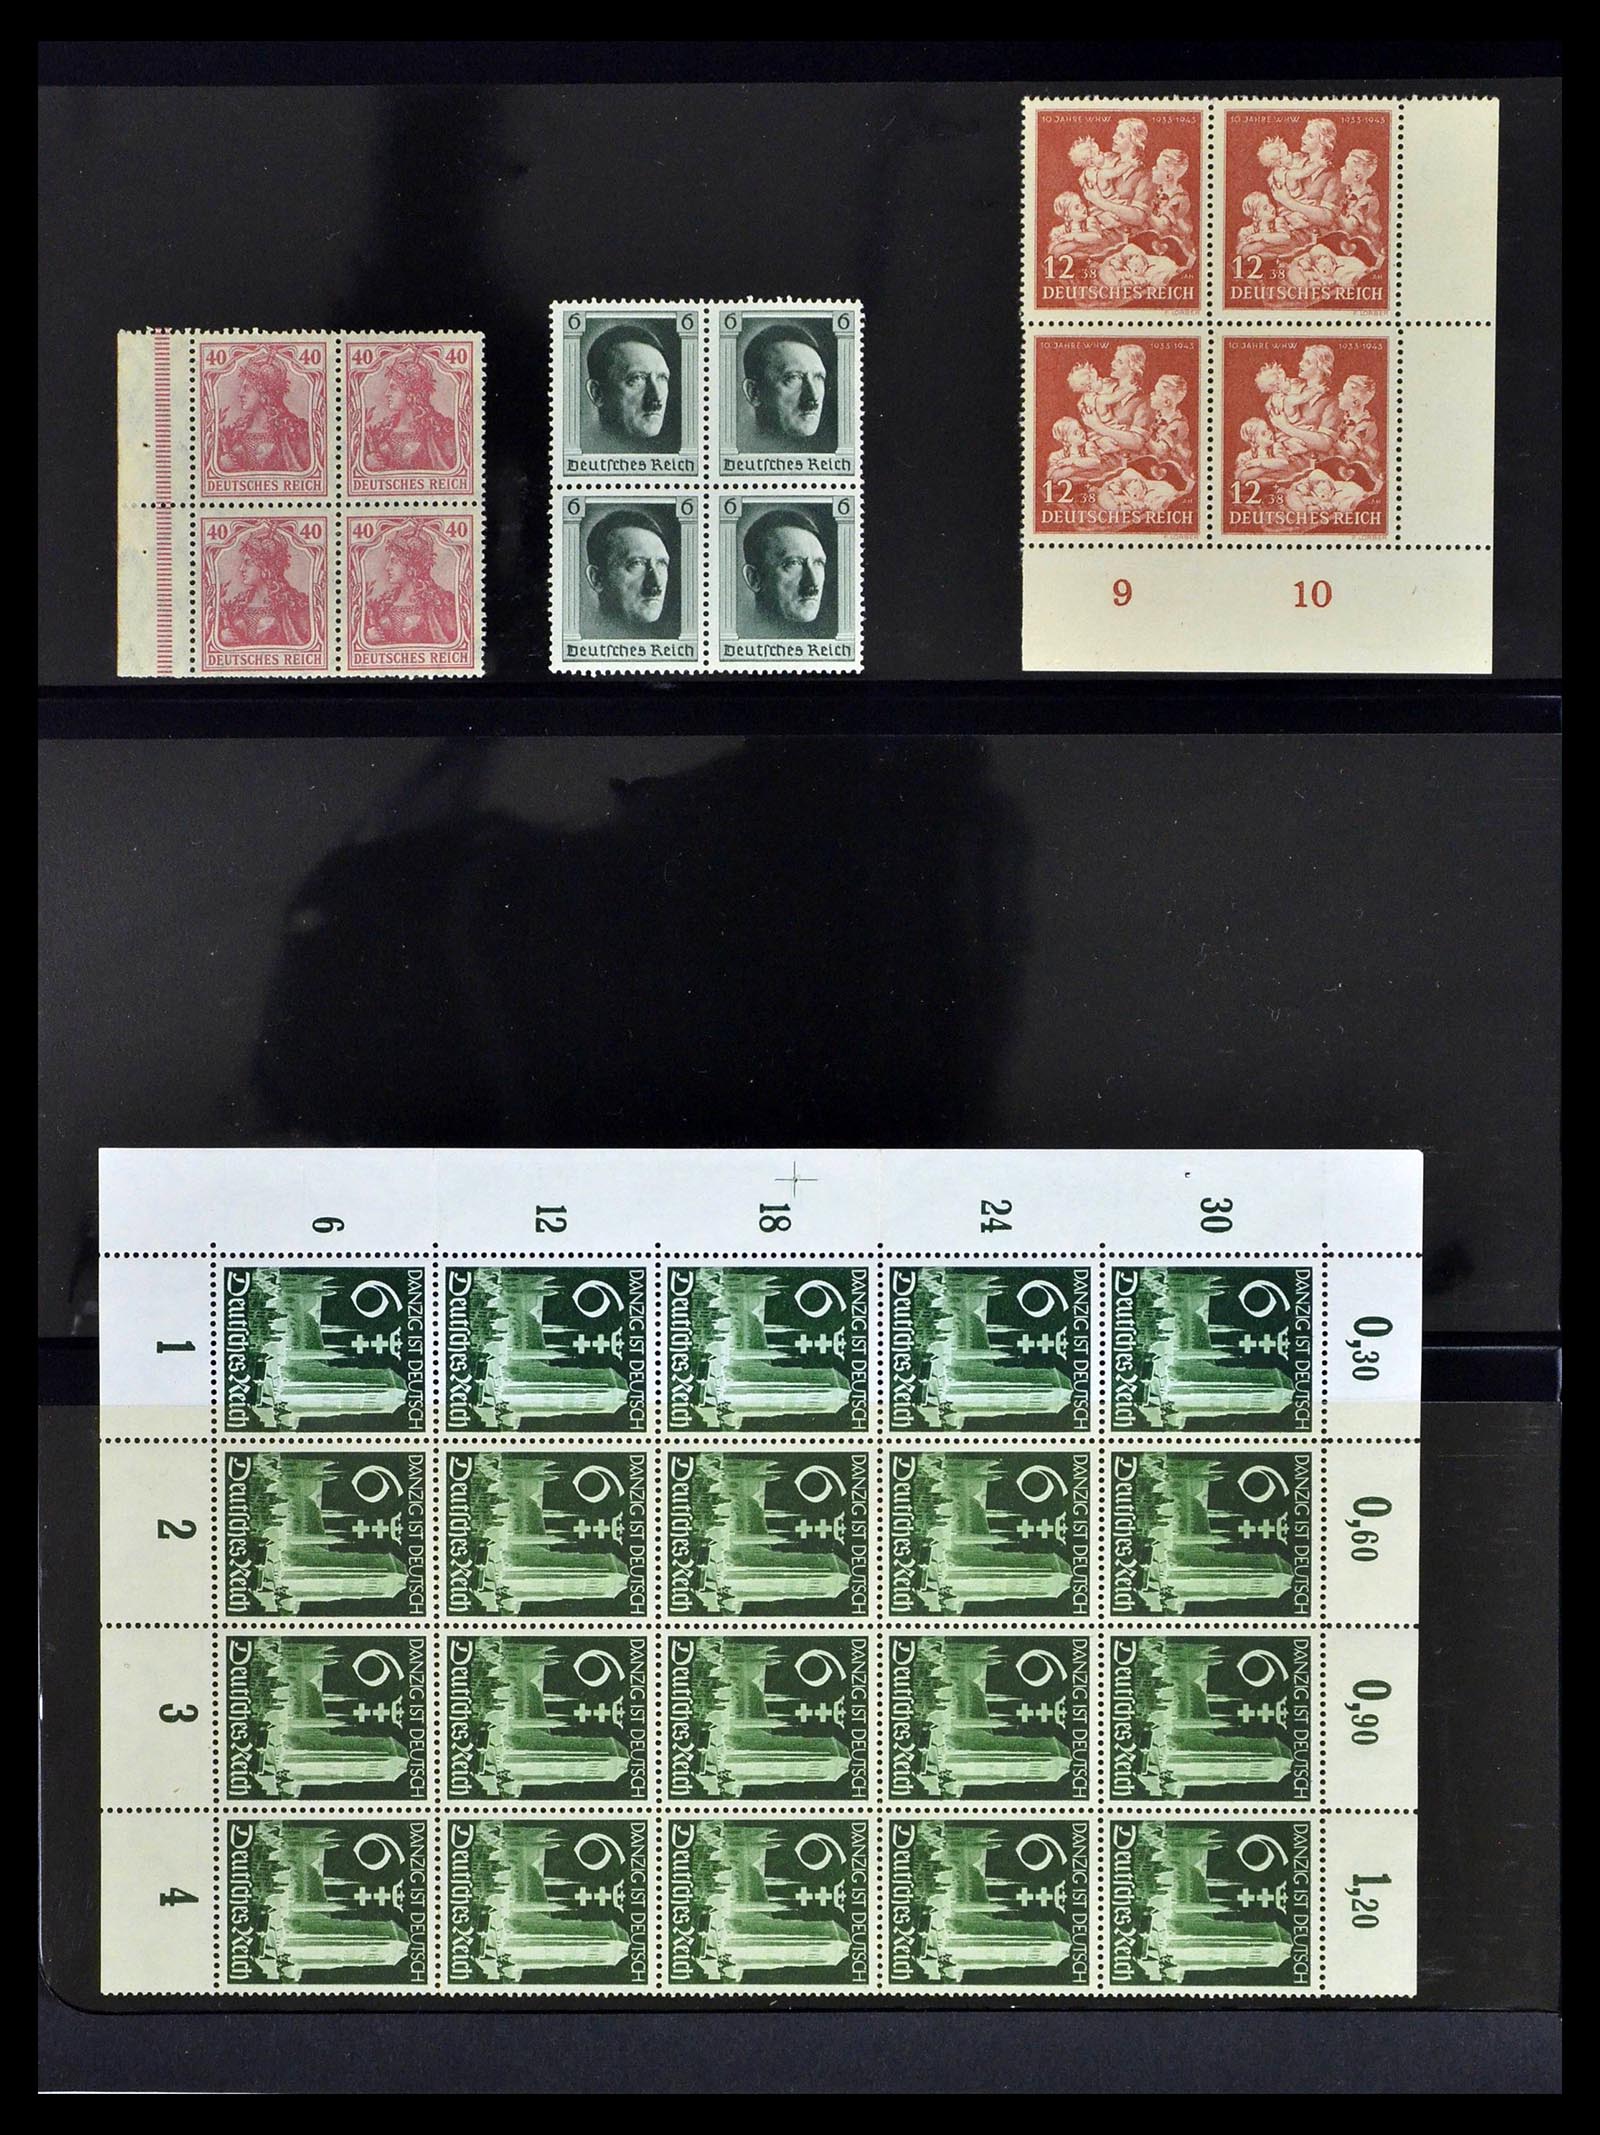 39255 0040 - Stamp collection 39255 German Reich MNH blocks of 4.